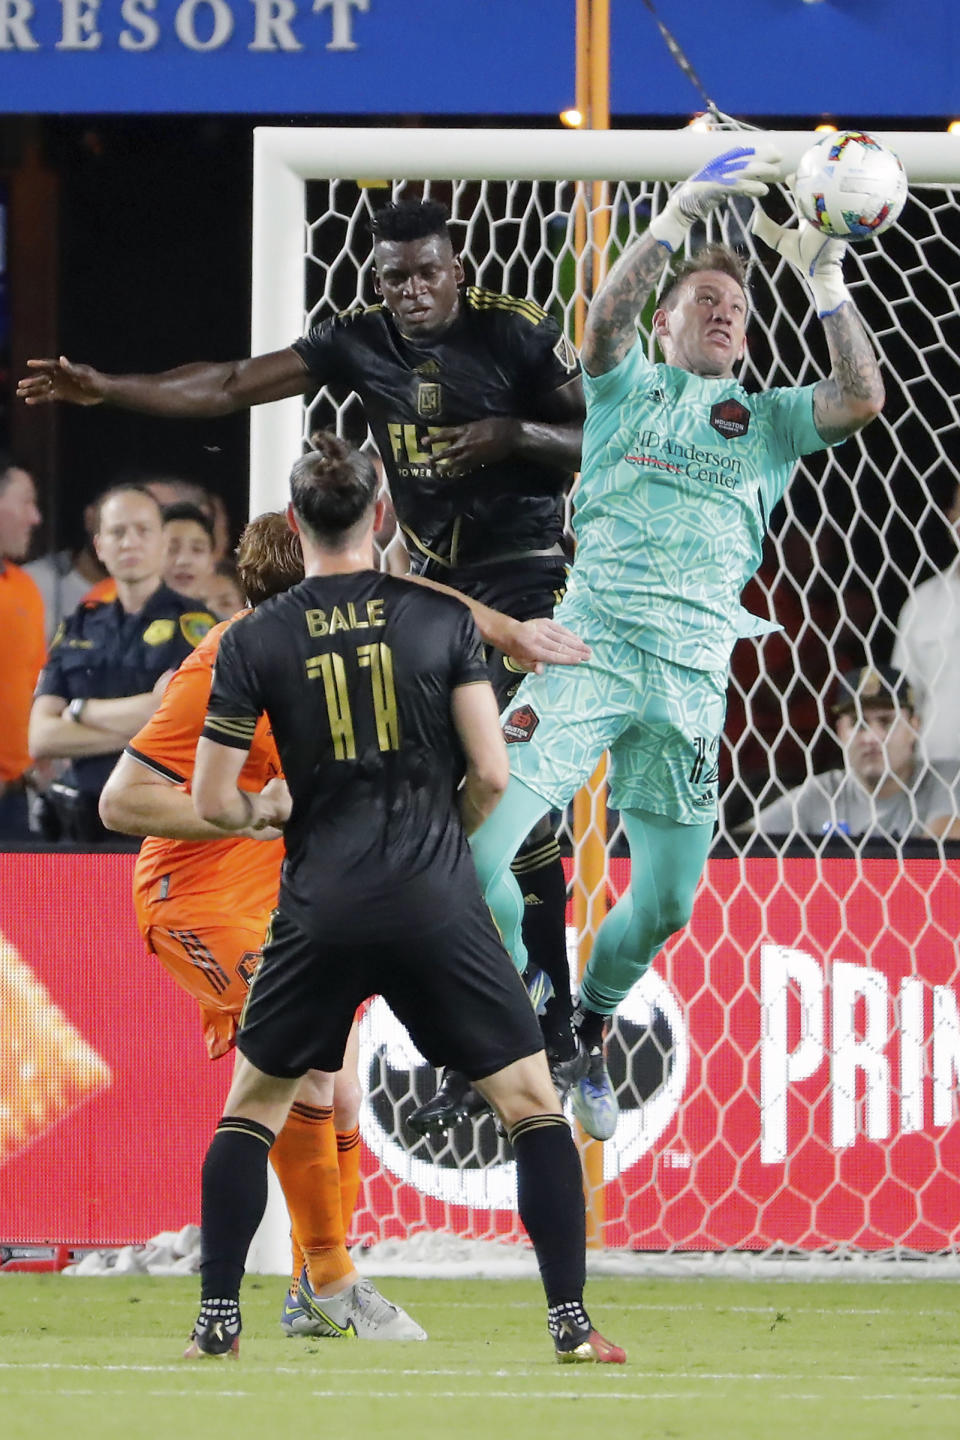 Houston Dynamo goalkeeper Steve Clark, top right, makes a save as he collides with Los Angeles FC defender Jesus Murillo, top left, as Gareth Bale (11) looks on during the second half of an MLS soccer match Wednesday, Aug. 31, 2022, in Houston. (AP Photo/Michael Wyke)